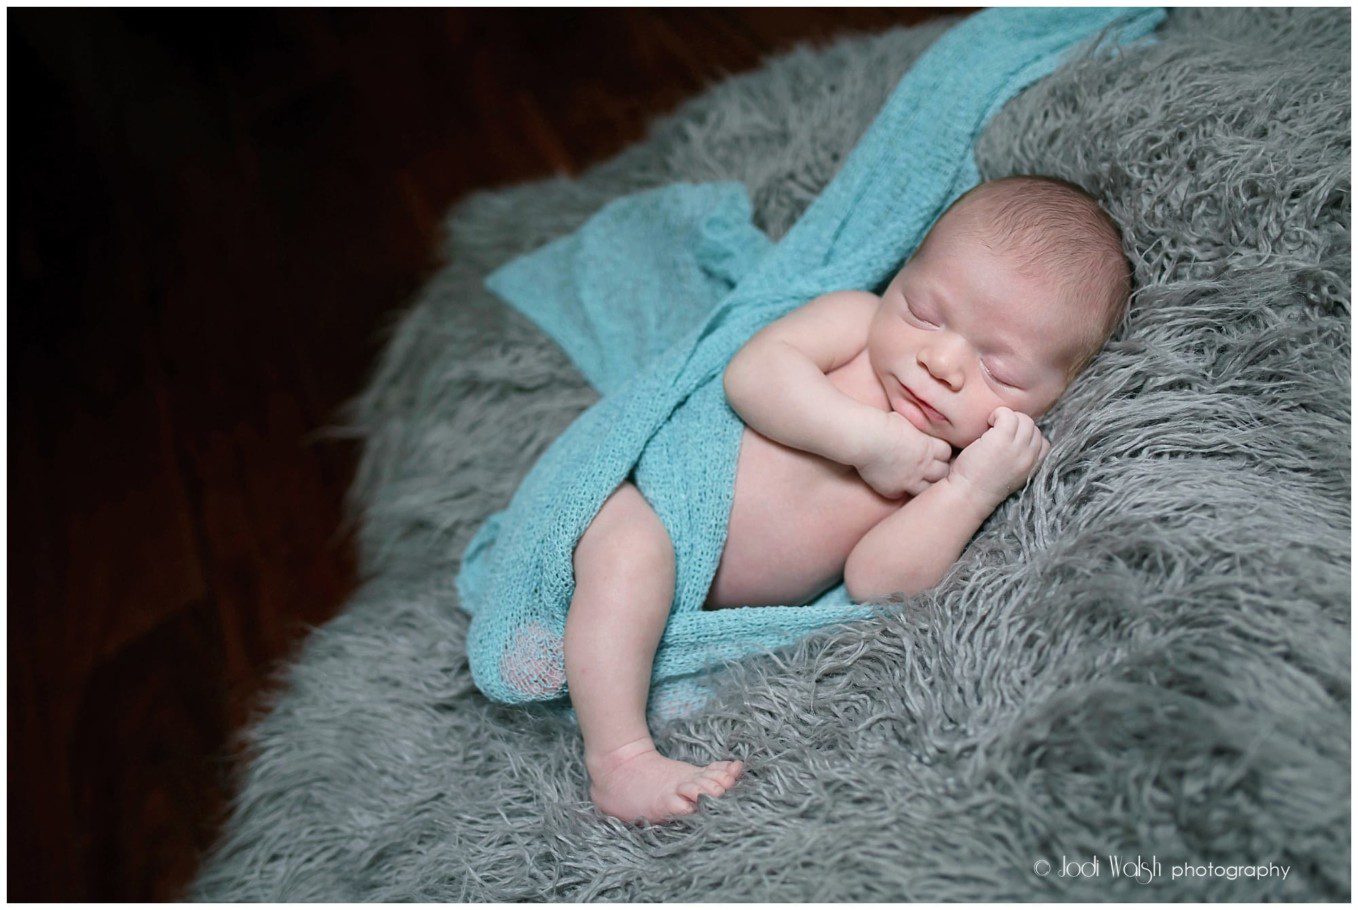 image of a newborn wrapped in a light blue blanket, laying on a gray fuzzy blanket.  He's sleeping with his hands up by his face.